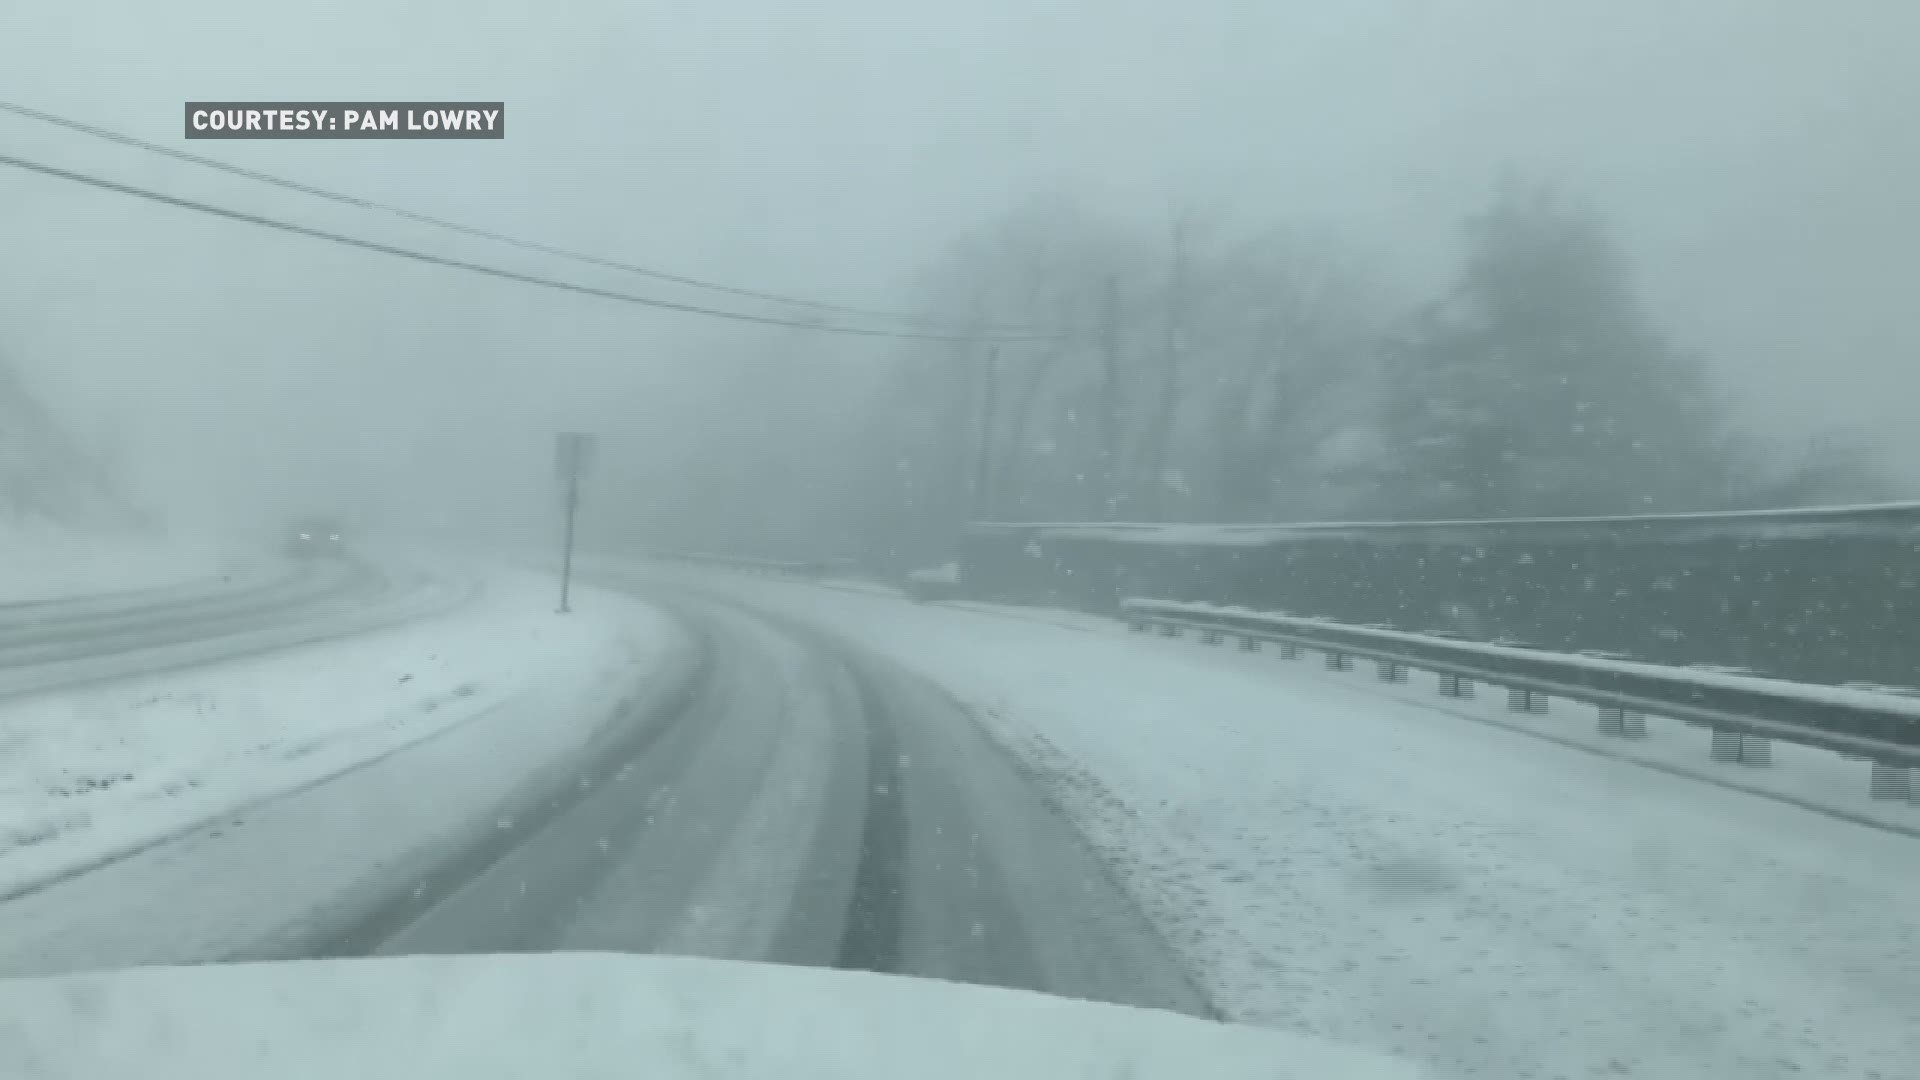 Pam Lowry shares this video of snow falling in Blowing Rock.